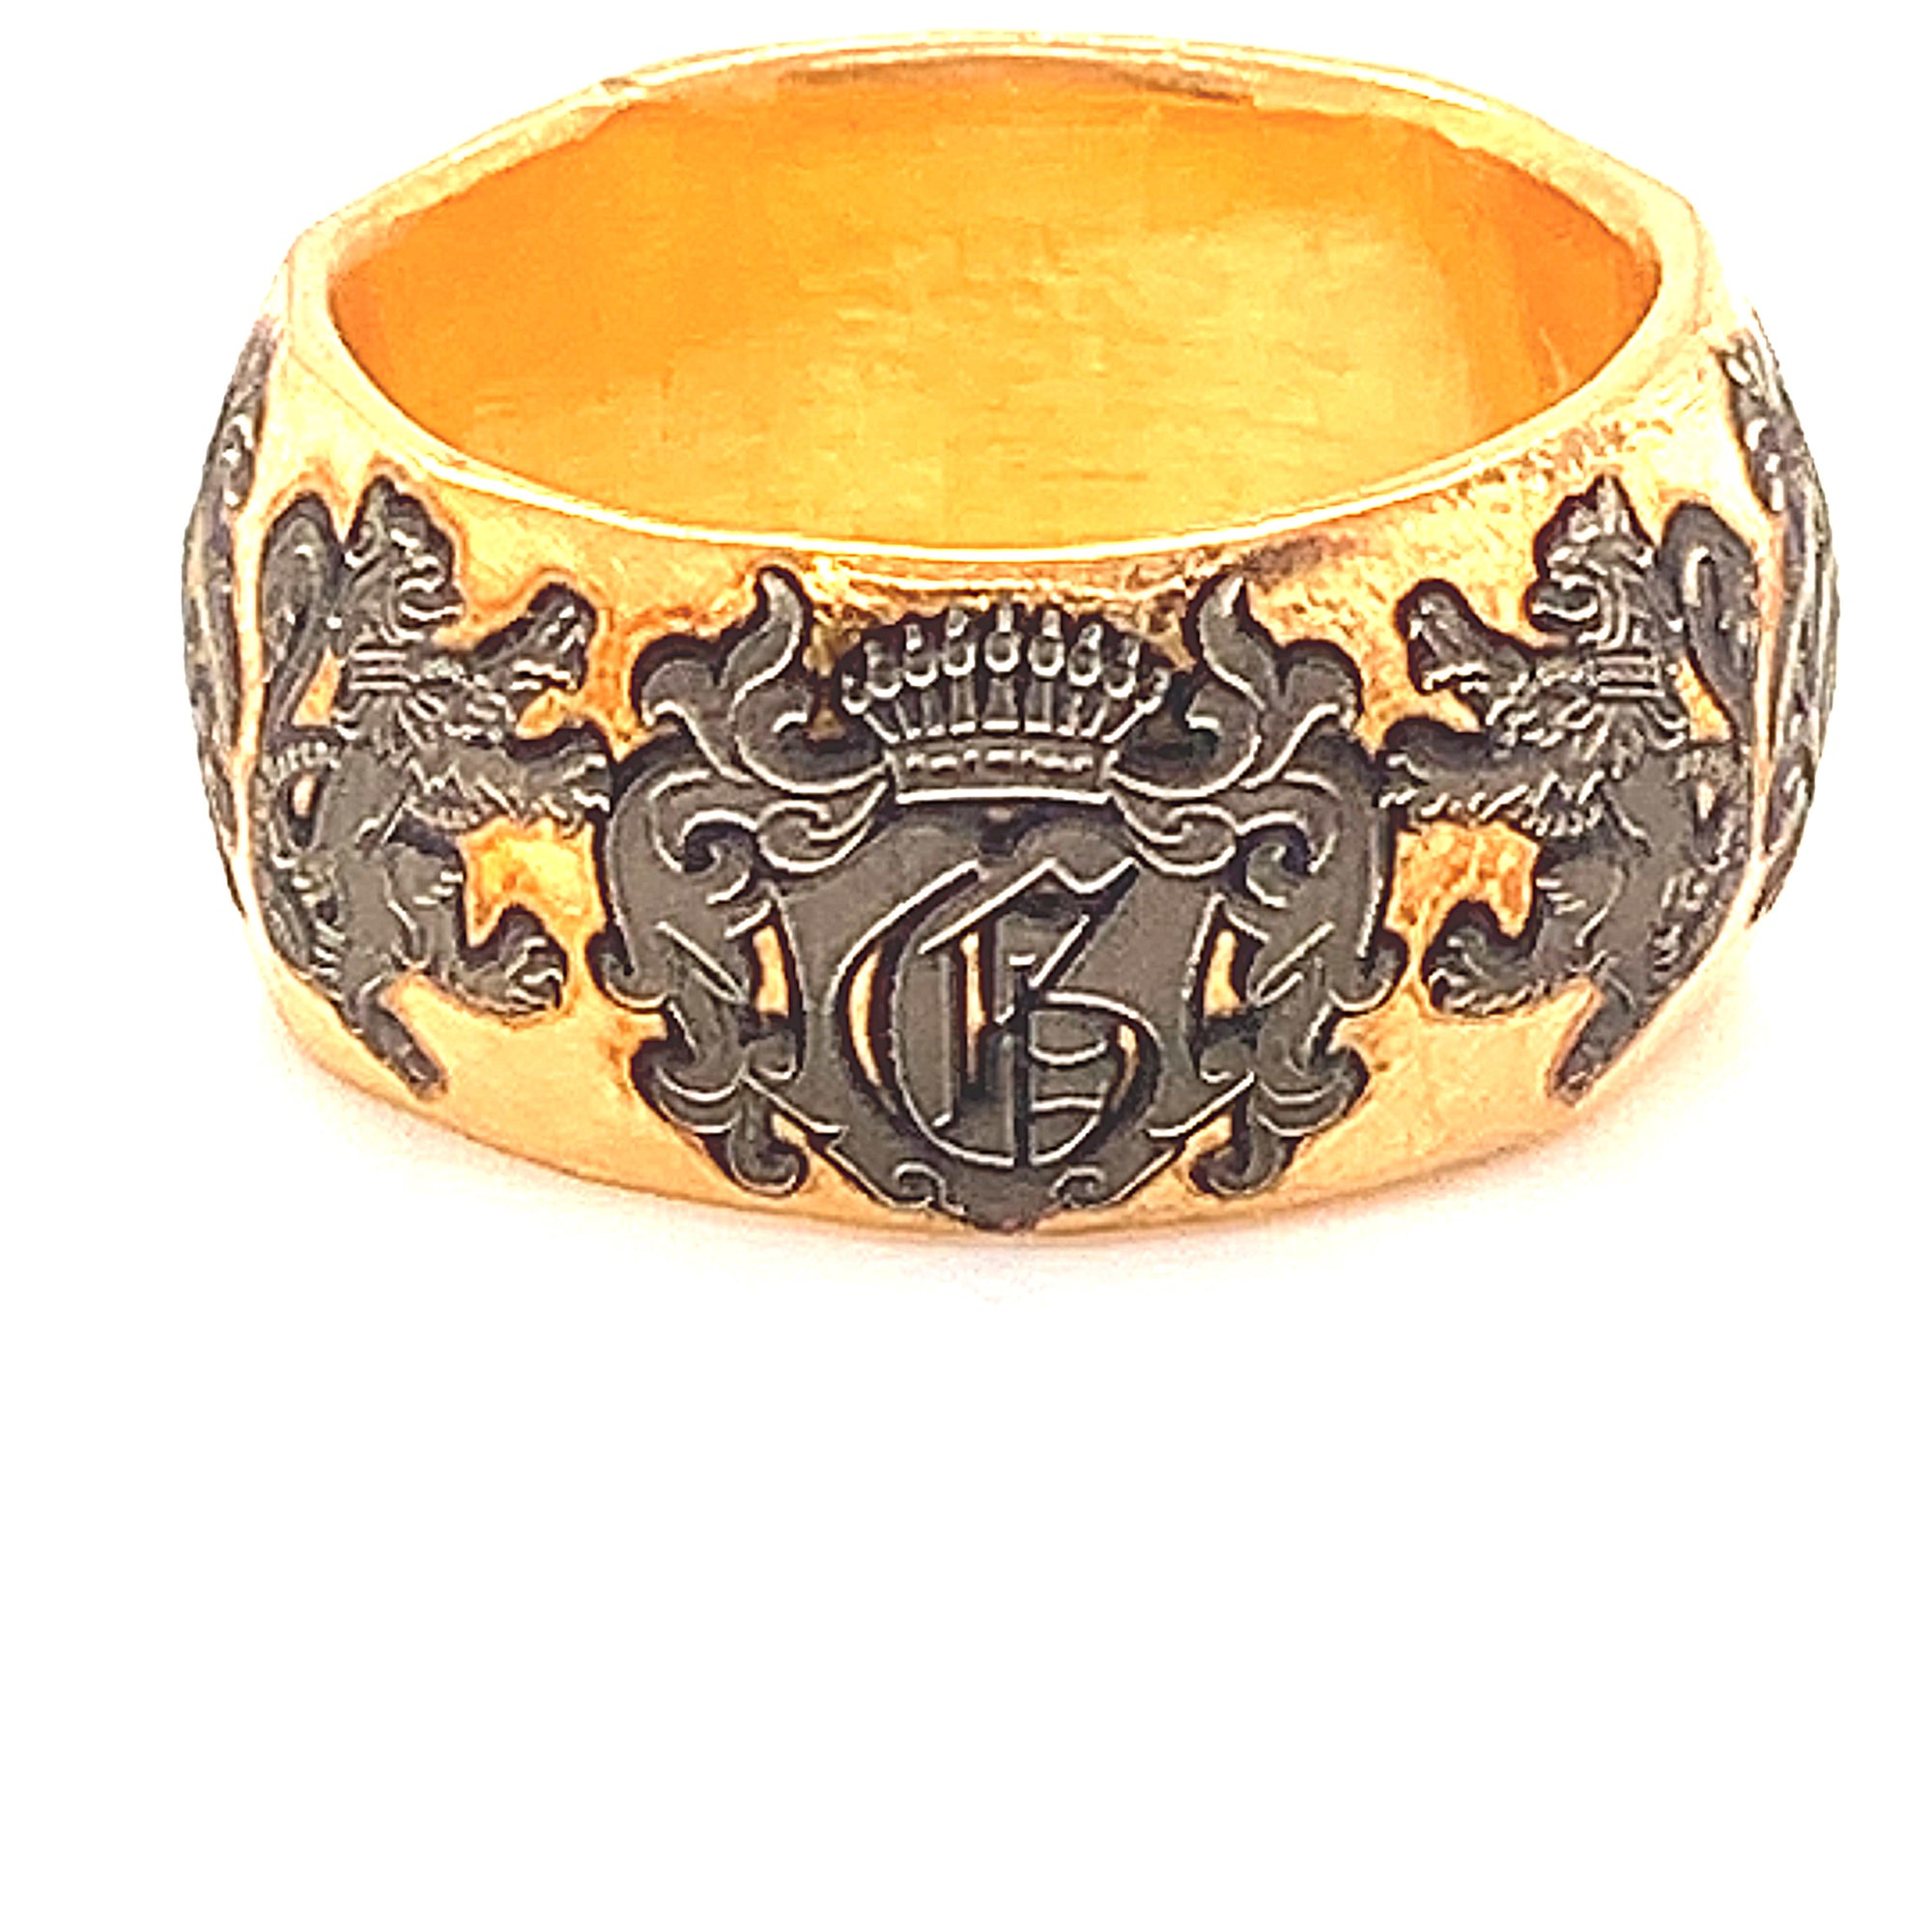 Gold Coat of Arm Ring, Handcrafted Family Crest Personalized Silver Wedding Band